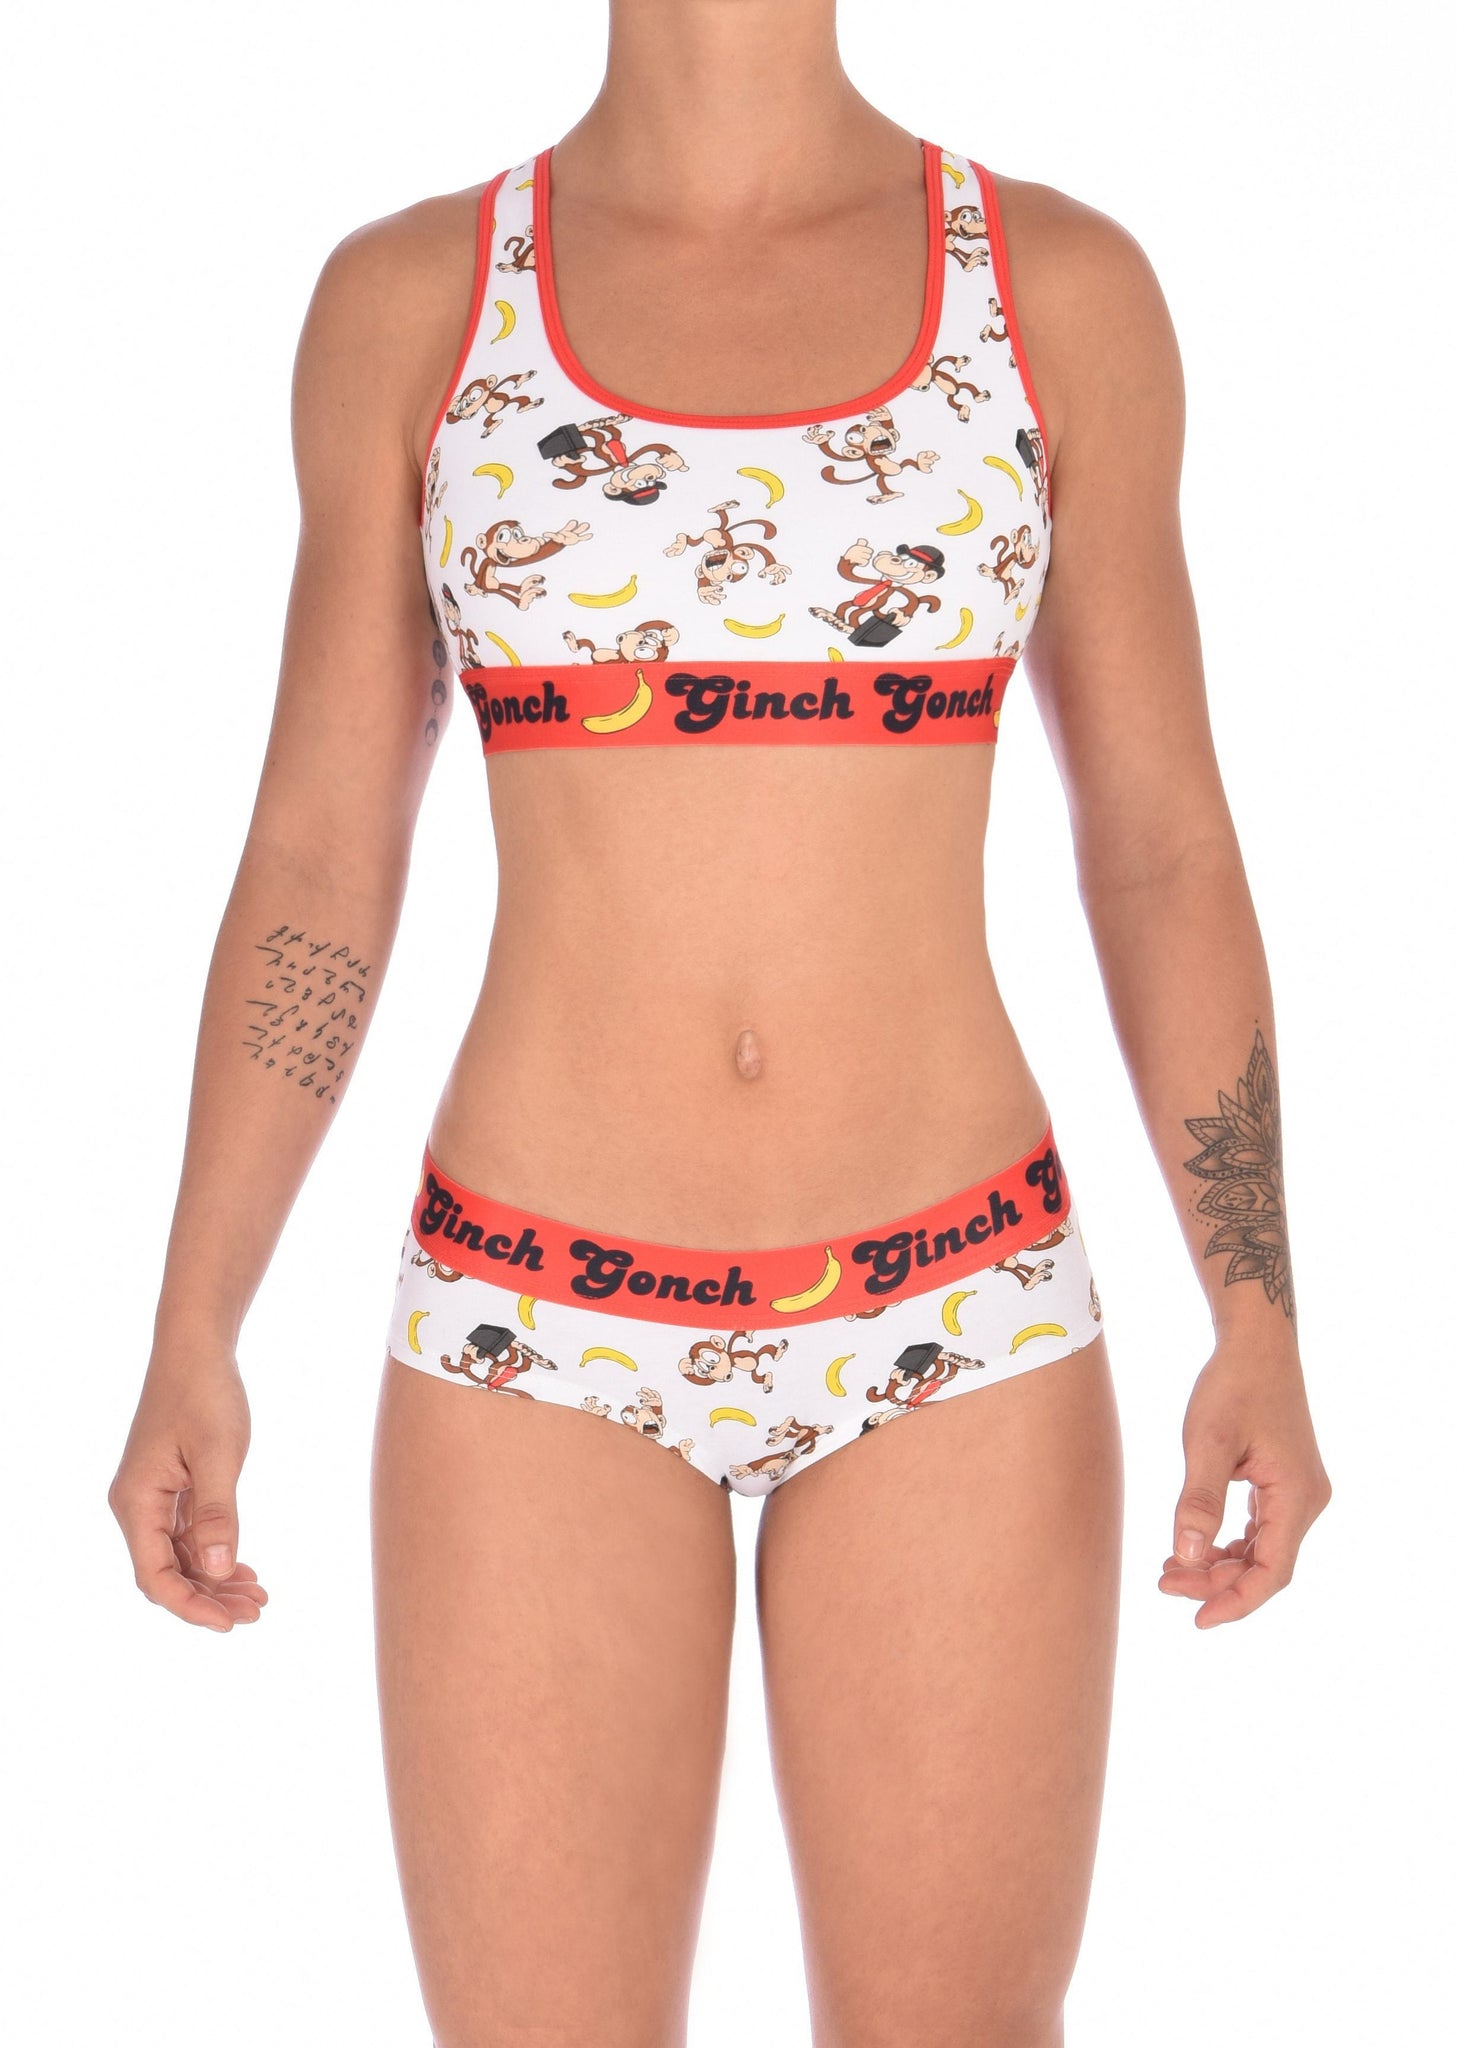 GG Ginch Gonch Gone Bananas cheeky gogo boy cut Brief women's underwear white fabric with monkeys and bananas red trim and red printed waistband front shown with matching sports bra